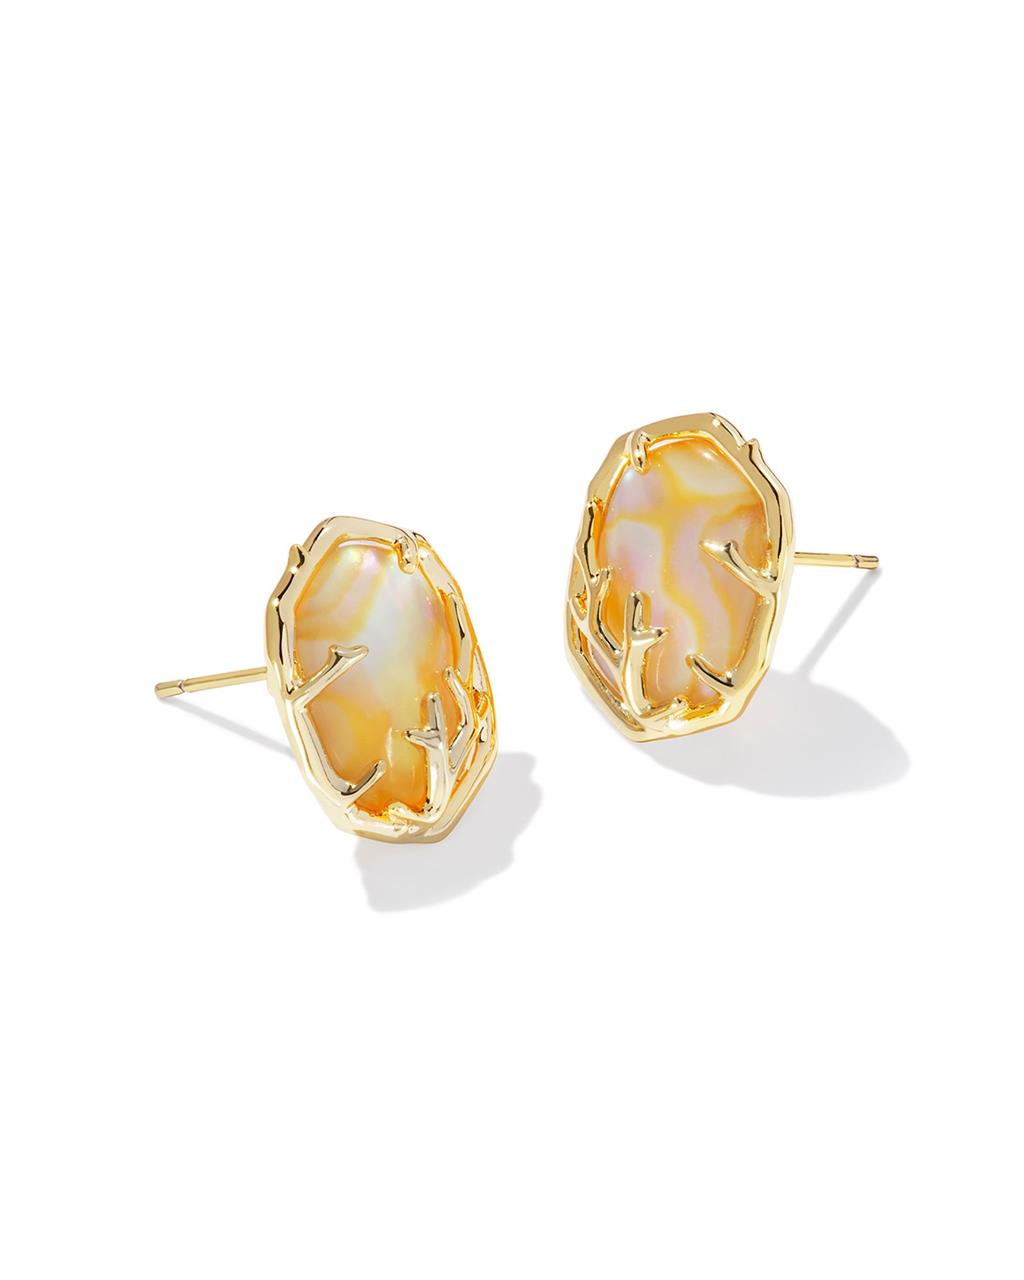 DAPHNE CORAL FRAME STUD EARRINGS GOLD IRIDESCENT ABALONE